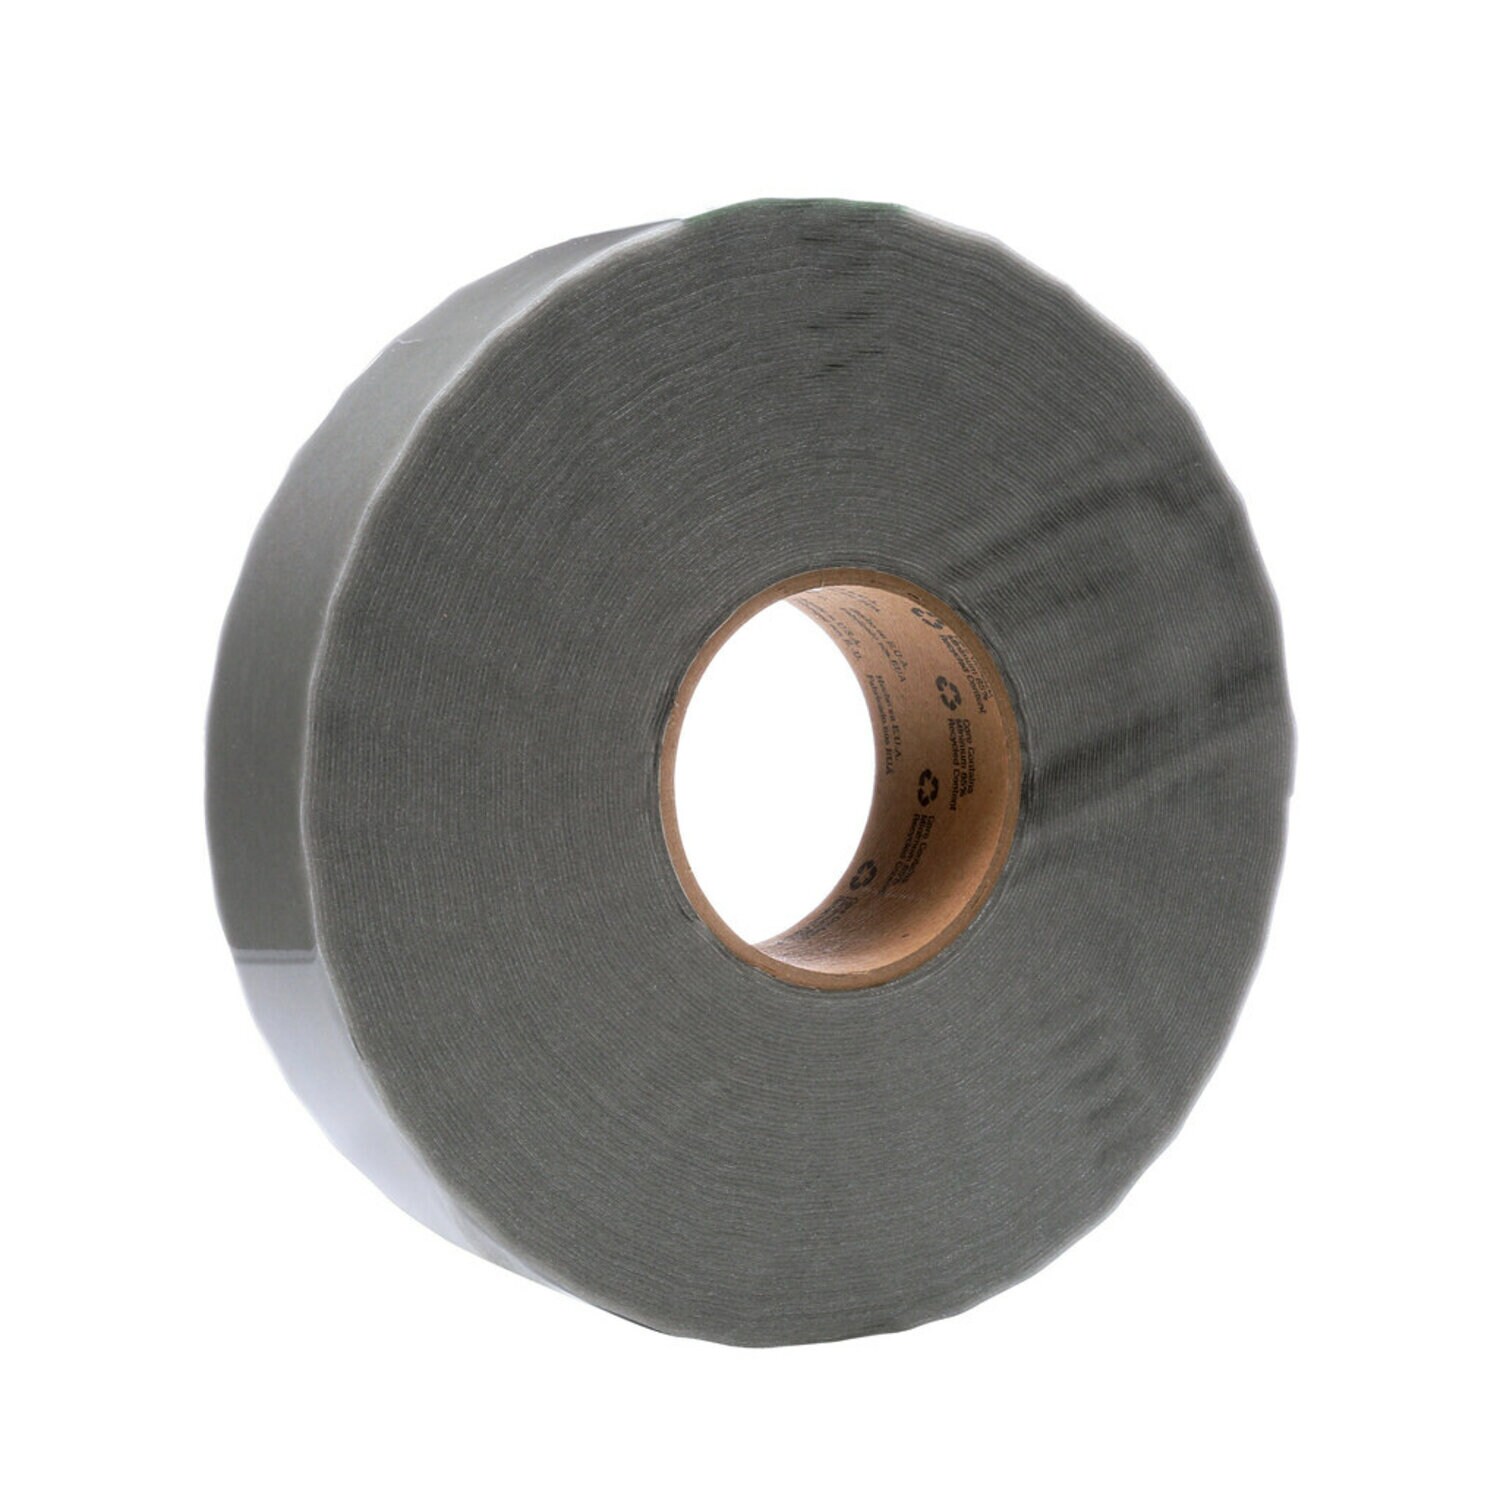 7010535900 - 3M Extreme Sealing Tape 4411G, Gray, 3 in x 36 yd, 40 mil, 3 rolls per
case